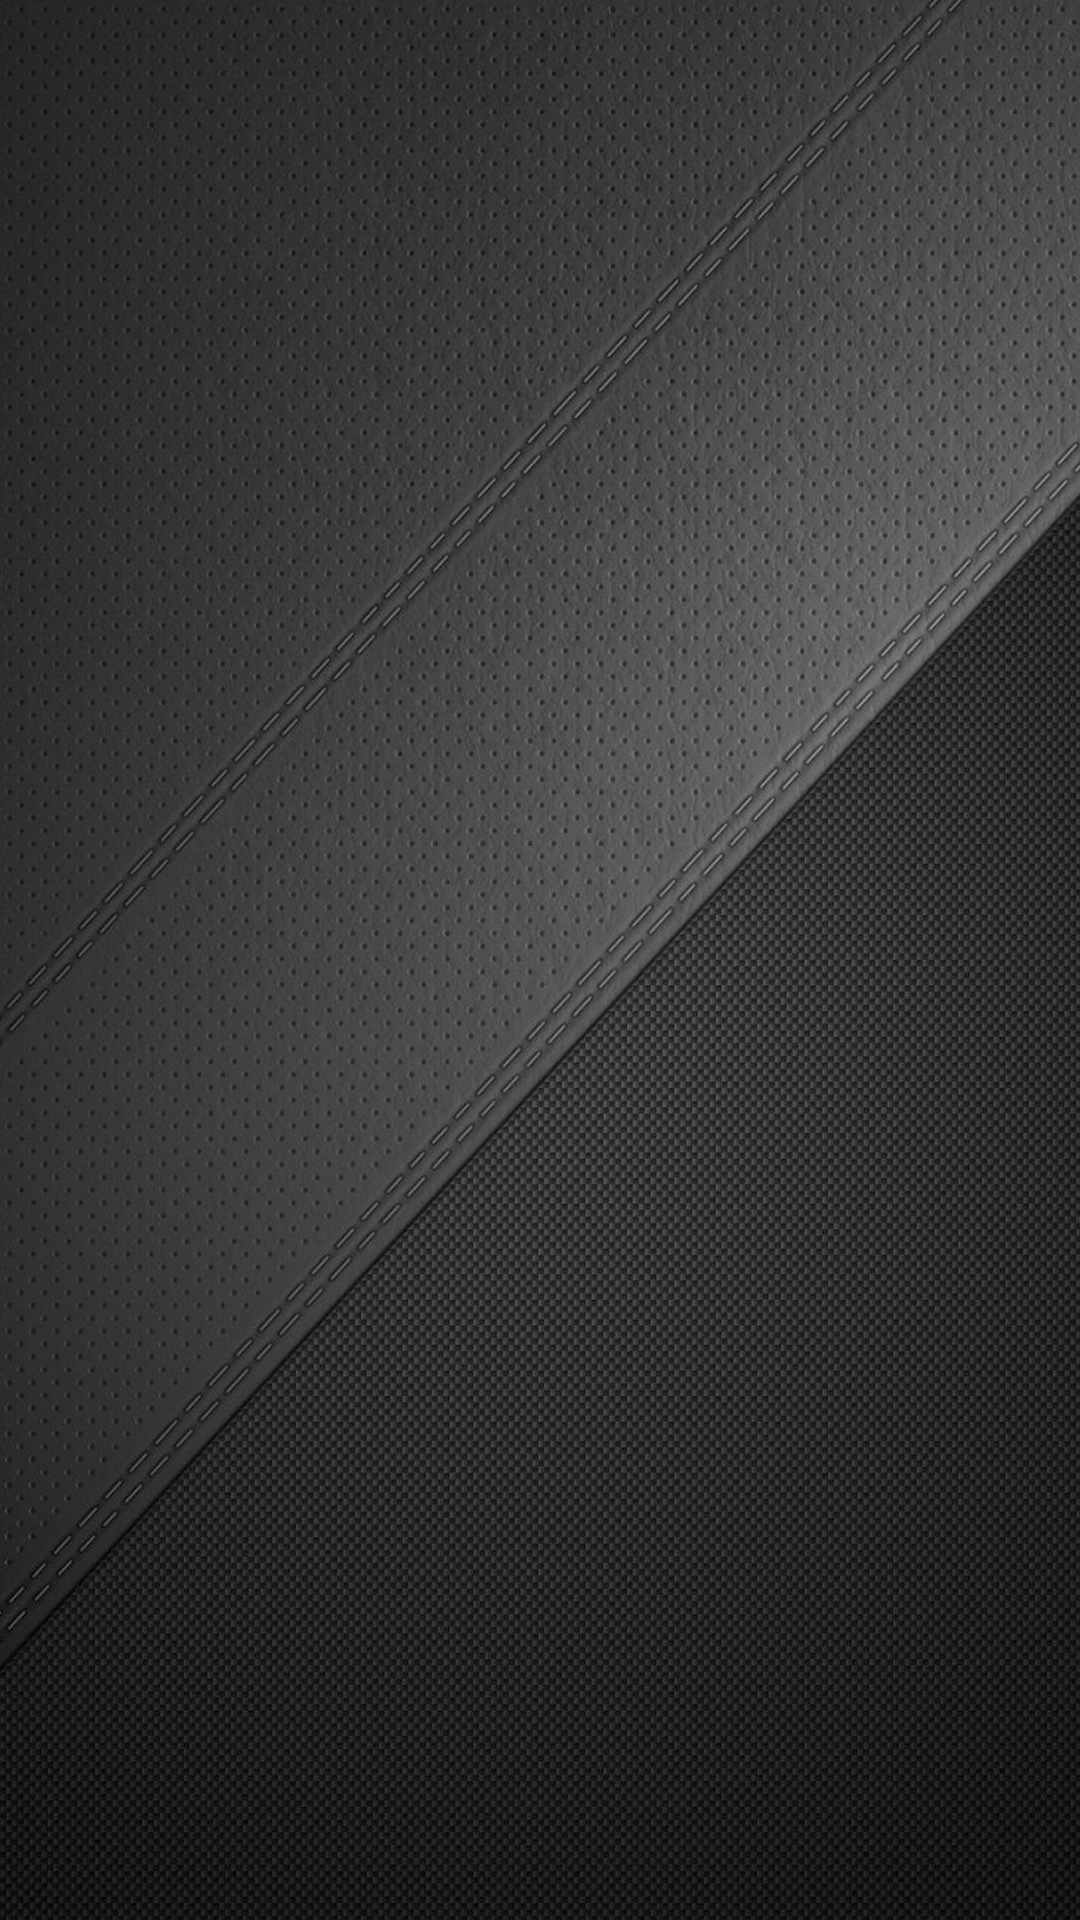 Abstract Black And Gray Background Picture. Black abstract background, Phone wallpaper, Dark wallpaper